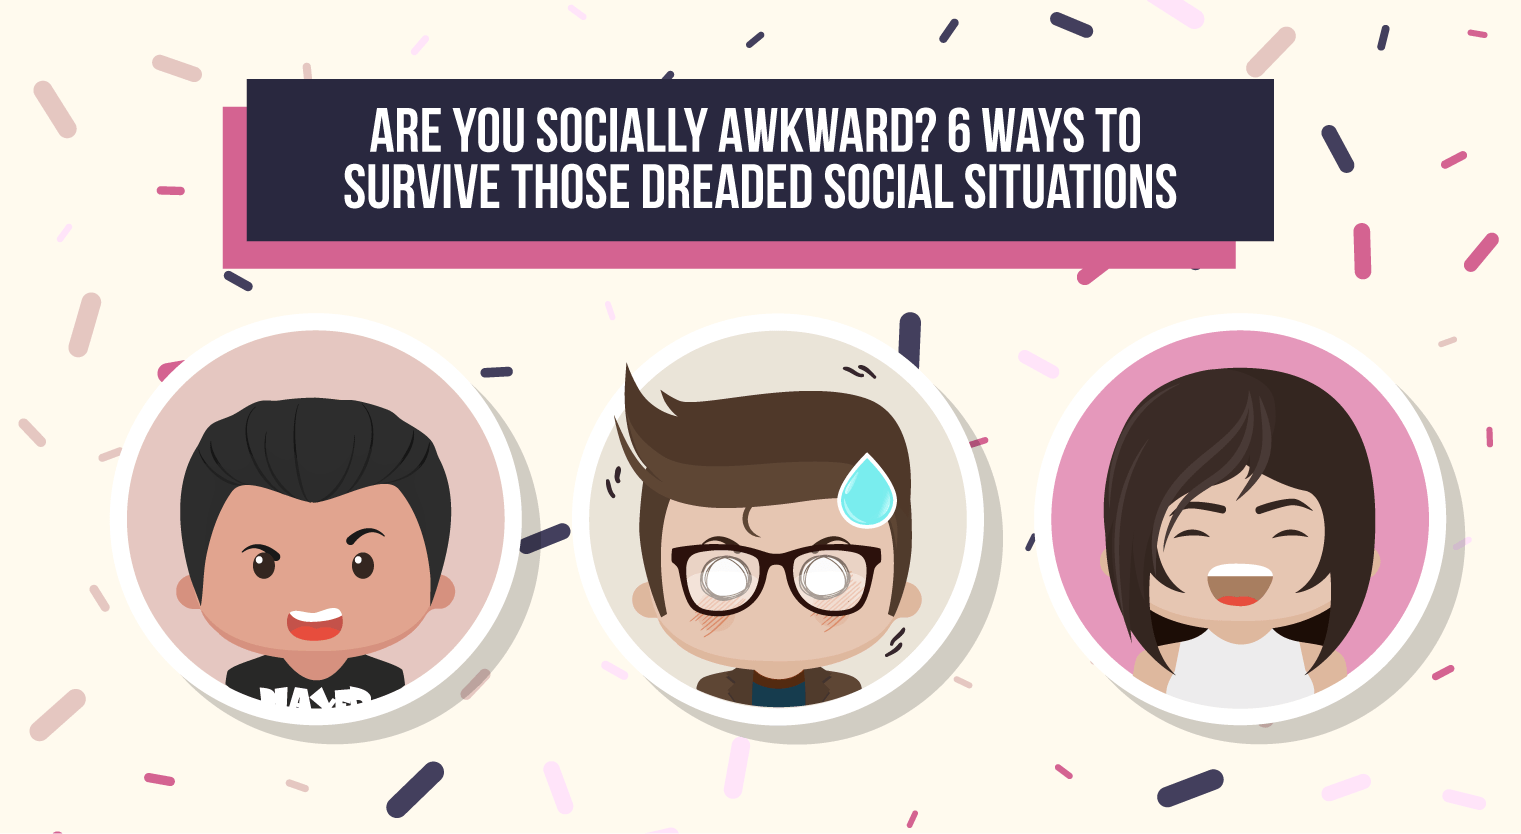 Are You Socially Awkward? 6 Ways to Survive Those Dreaded Social Situations - Feature-Image